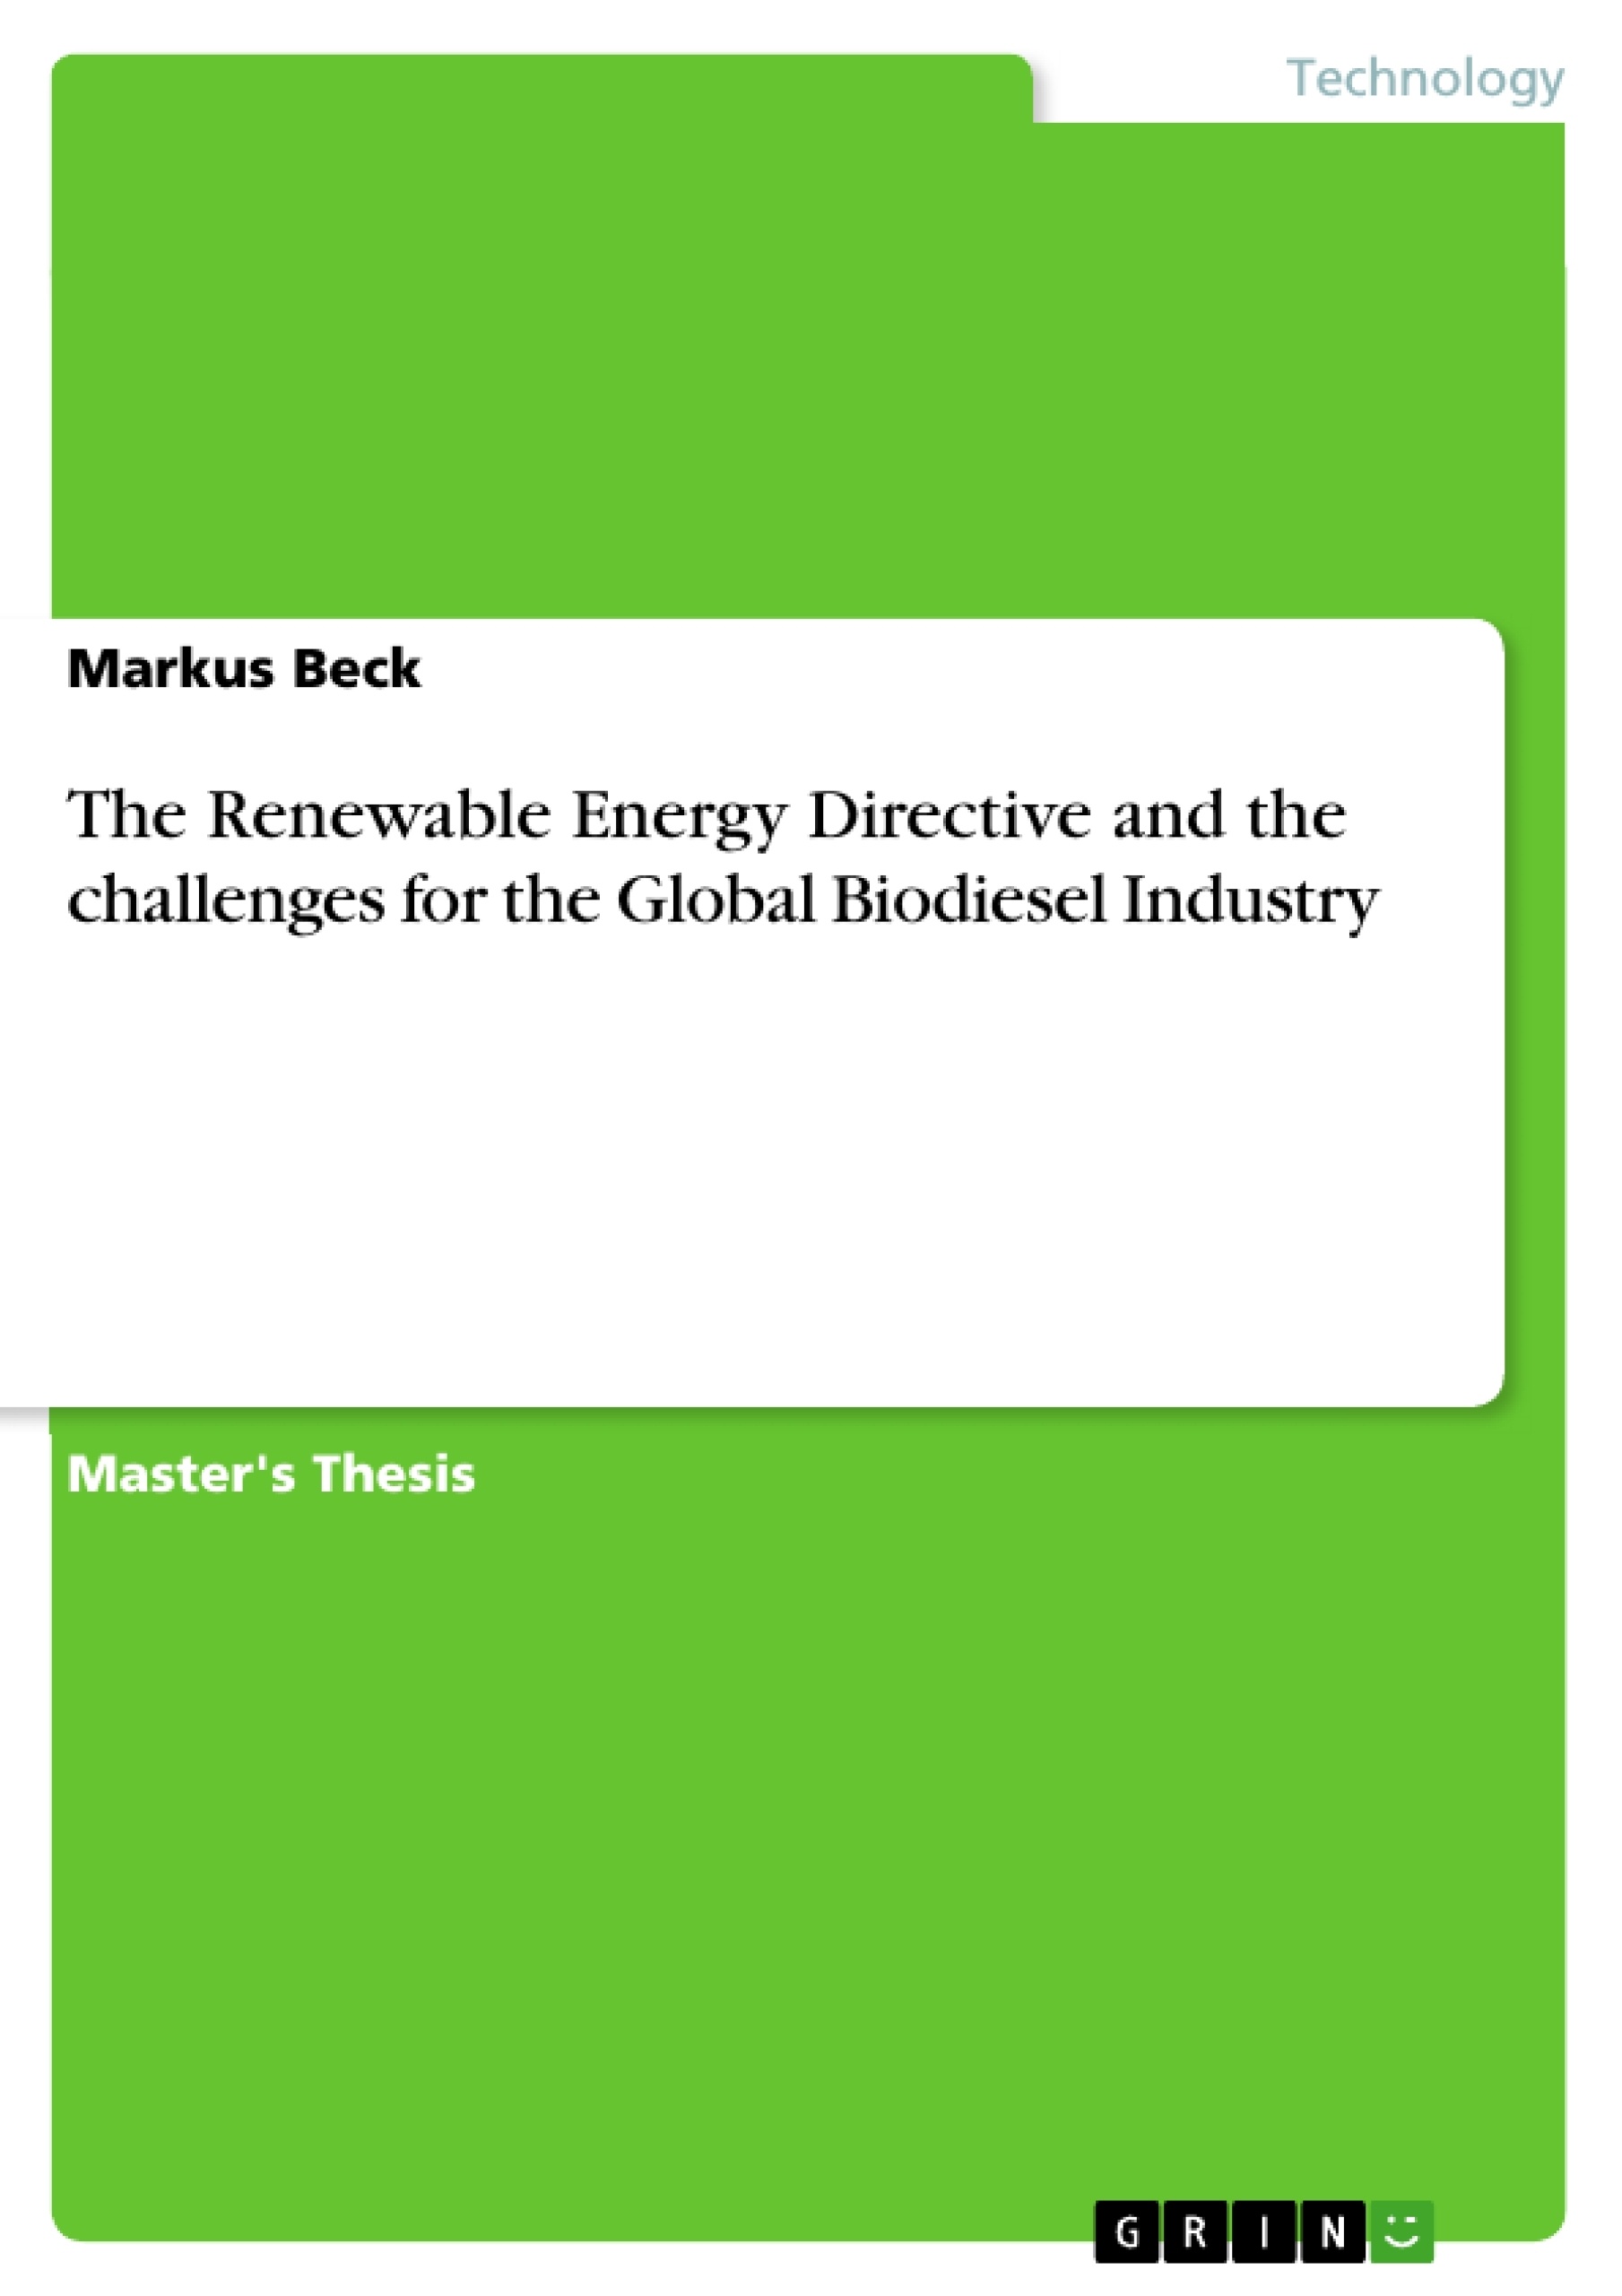 Title: The Renewable Energy Directive and the challenges for the Global Biodiesel Industry